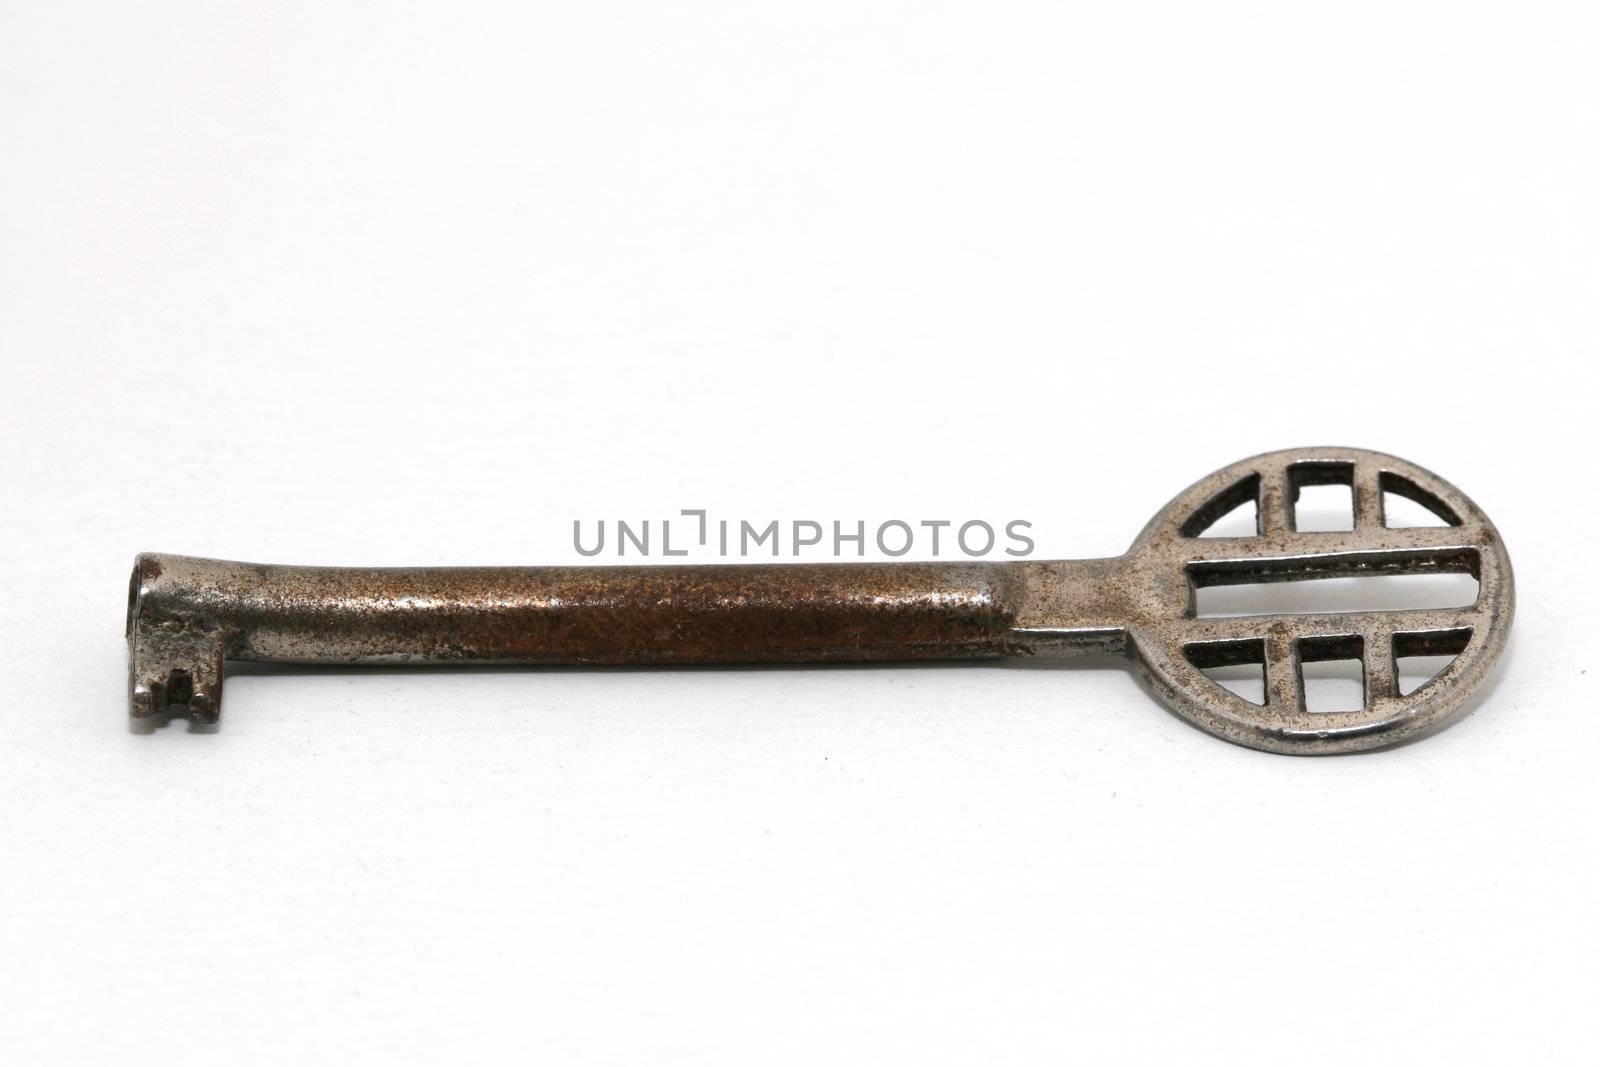 An old vintage key on white background